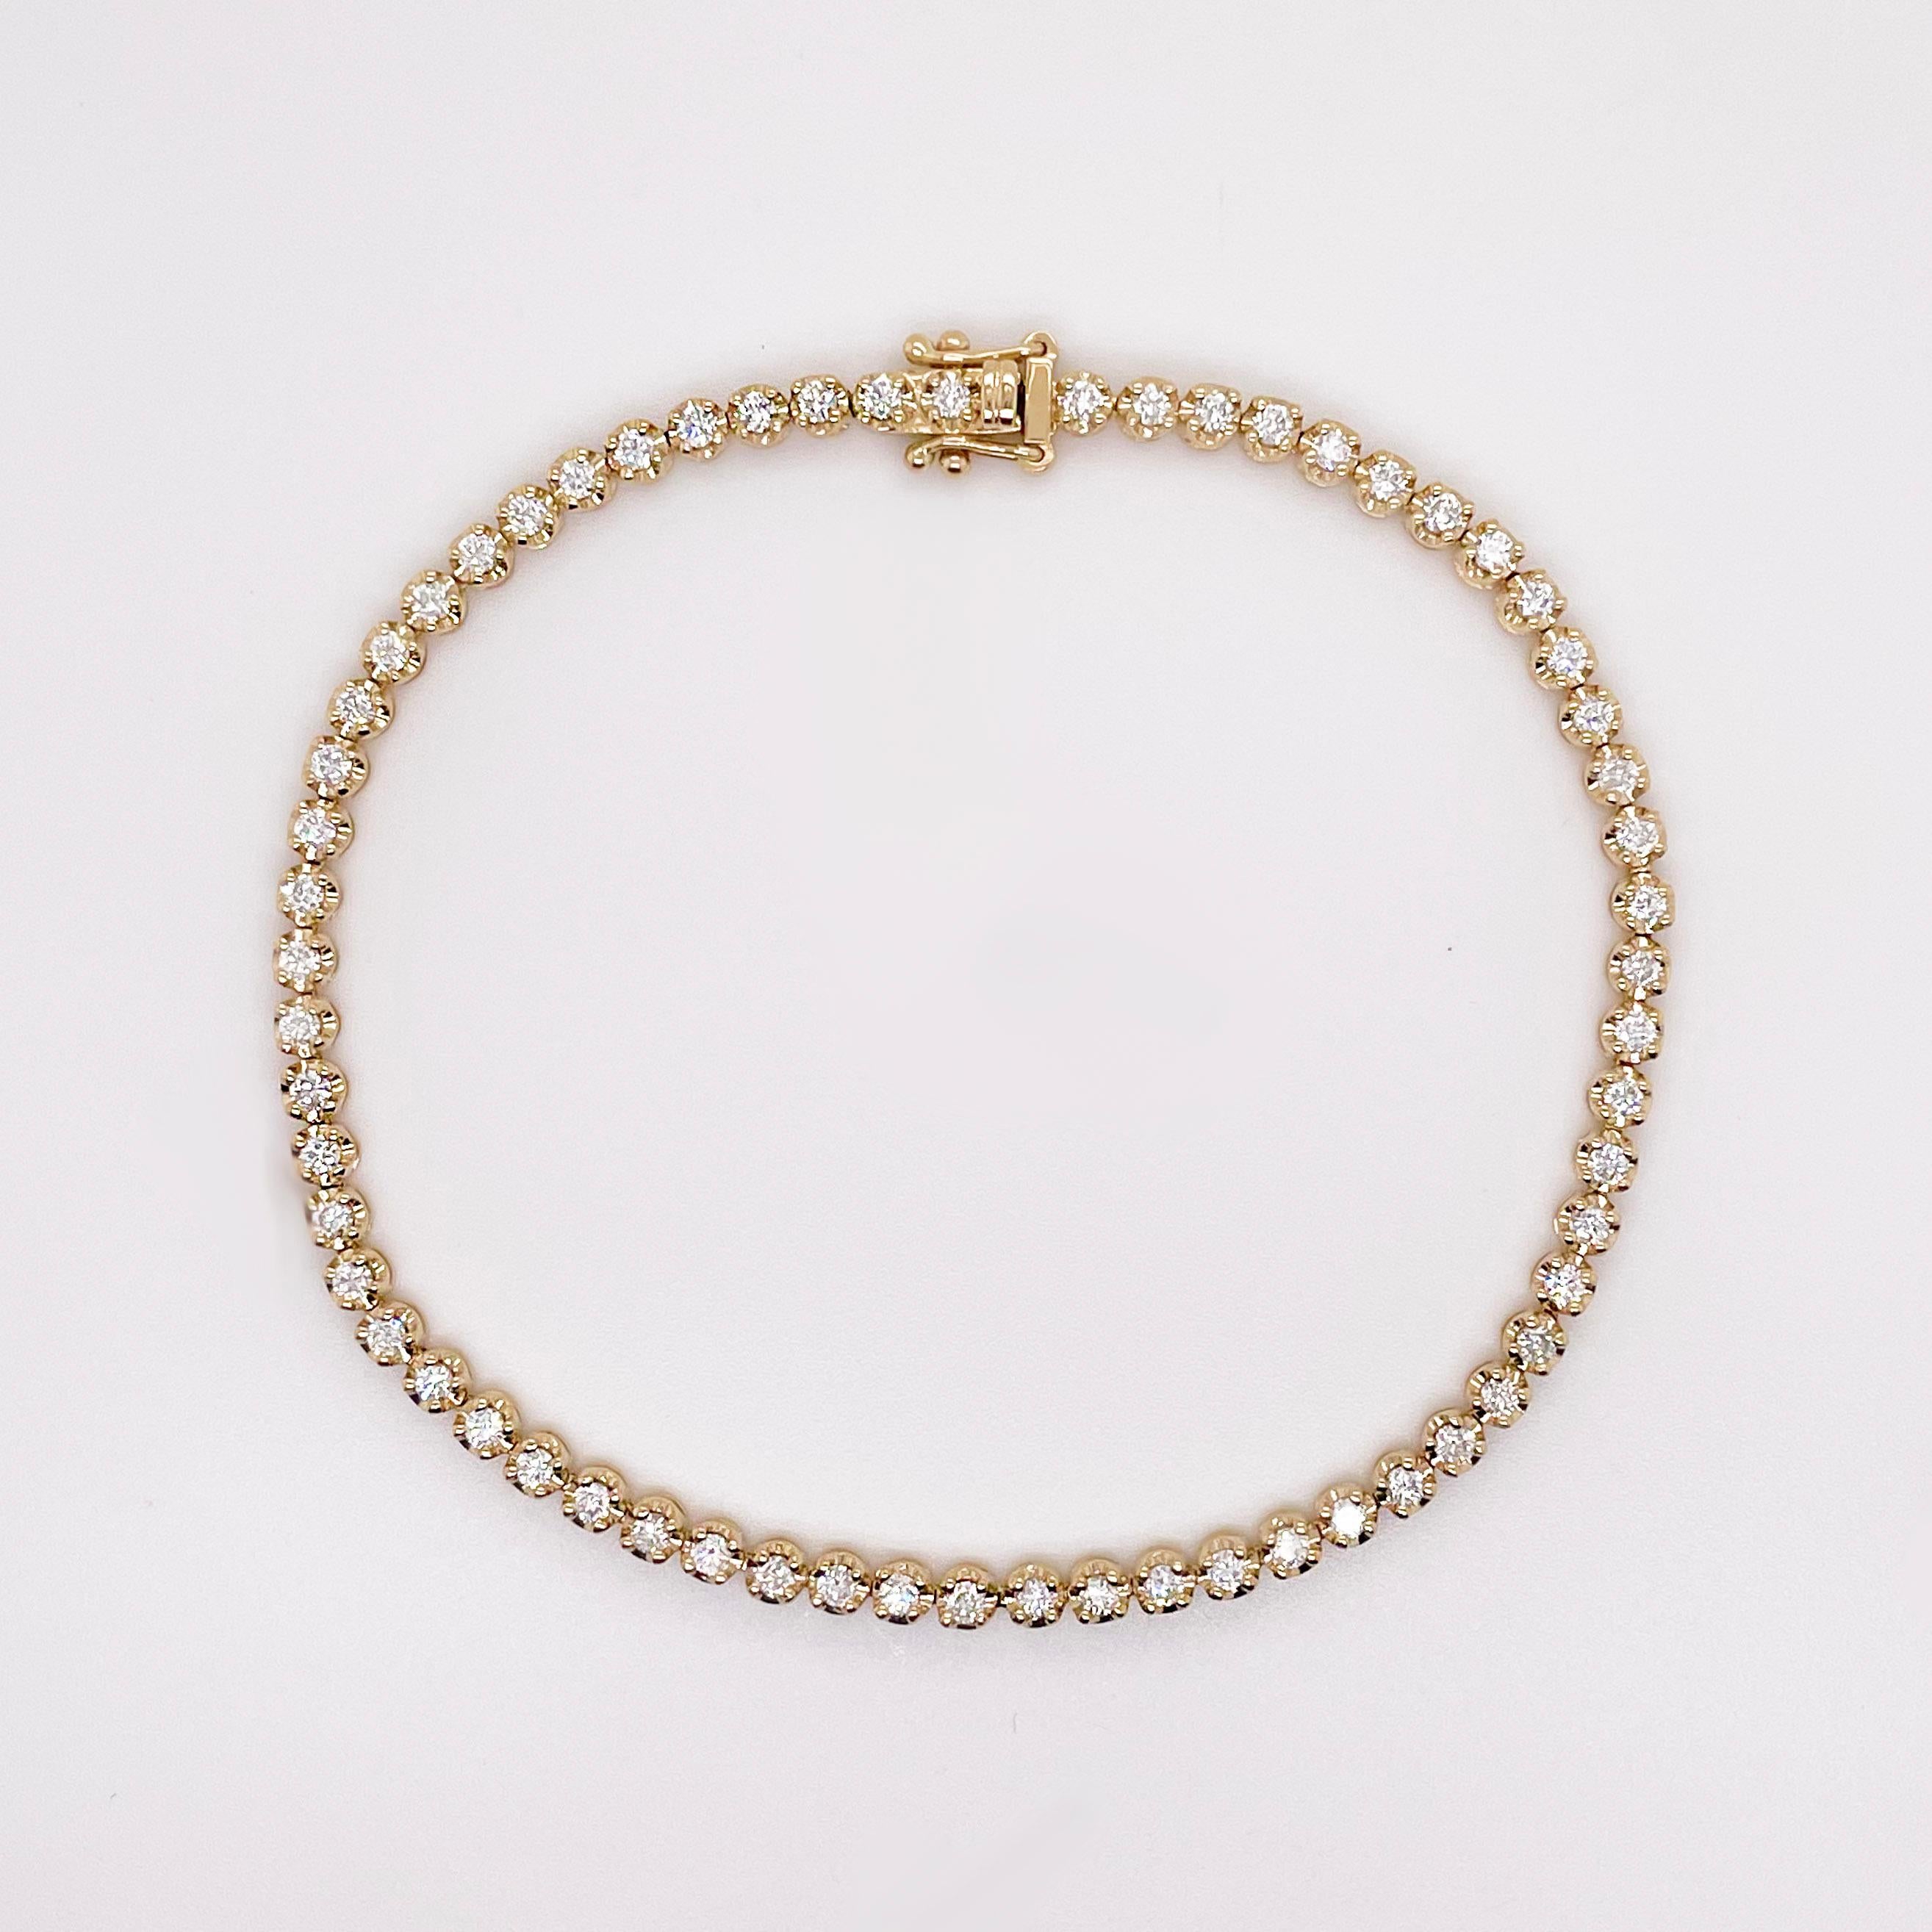 A tennis bracelet is a timeless piece of jewelry that will last you forever. This is a unique take on the classic tennis bracelet style with each of the 62 diamonds in a round, beaded 4-prong gold setting! The beaded texture reflects light and